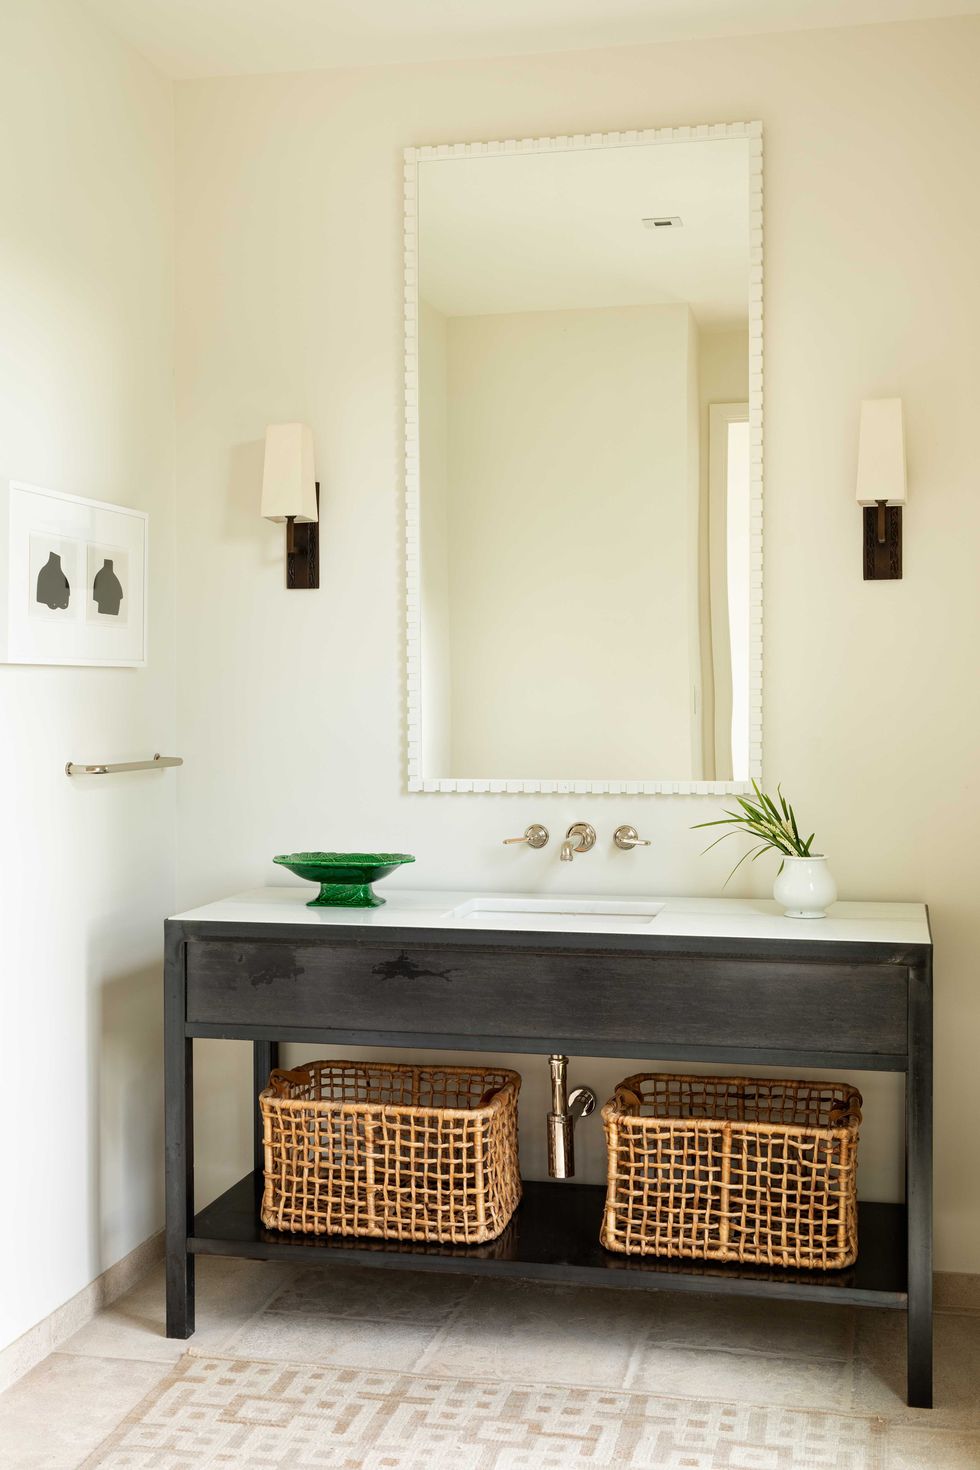 dark wooden console, white countertop, white painted walls